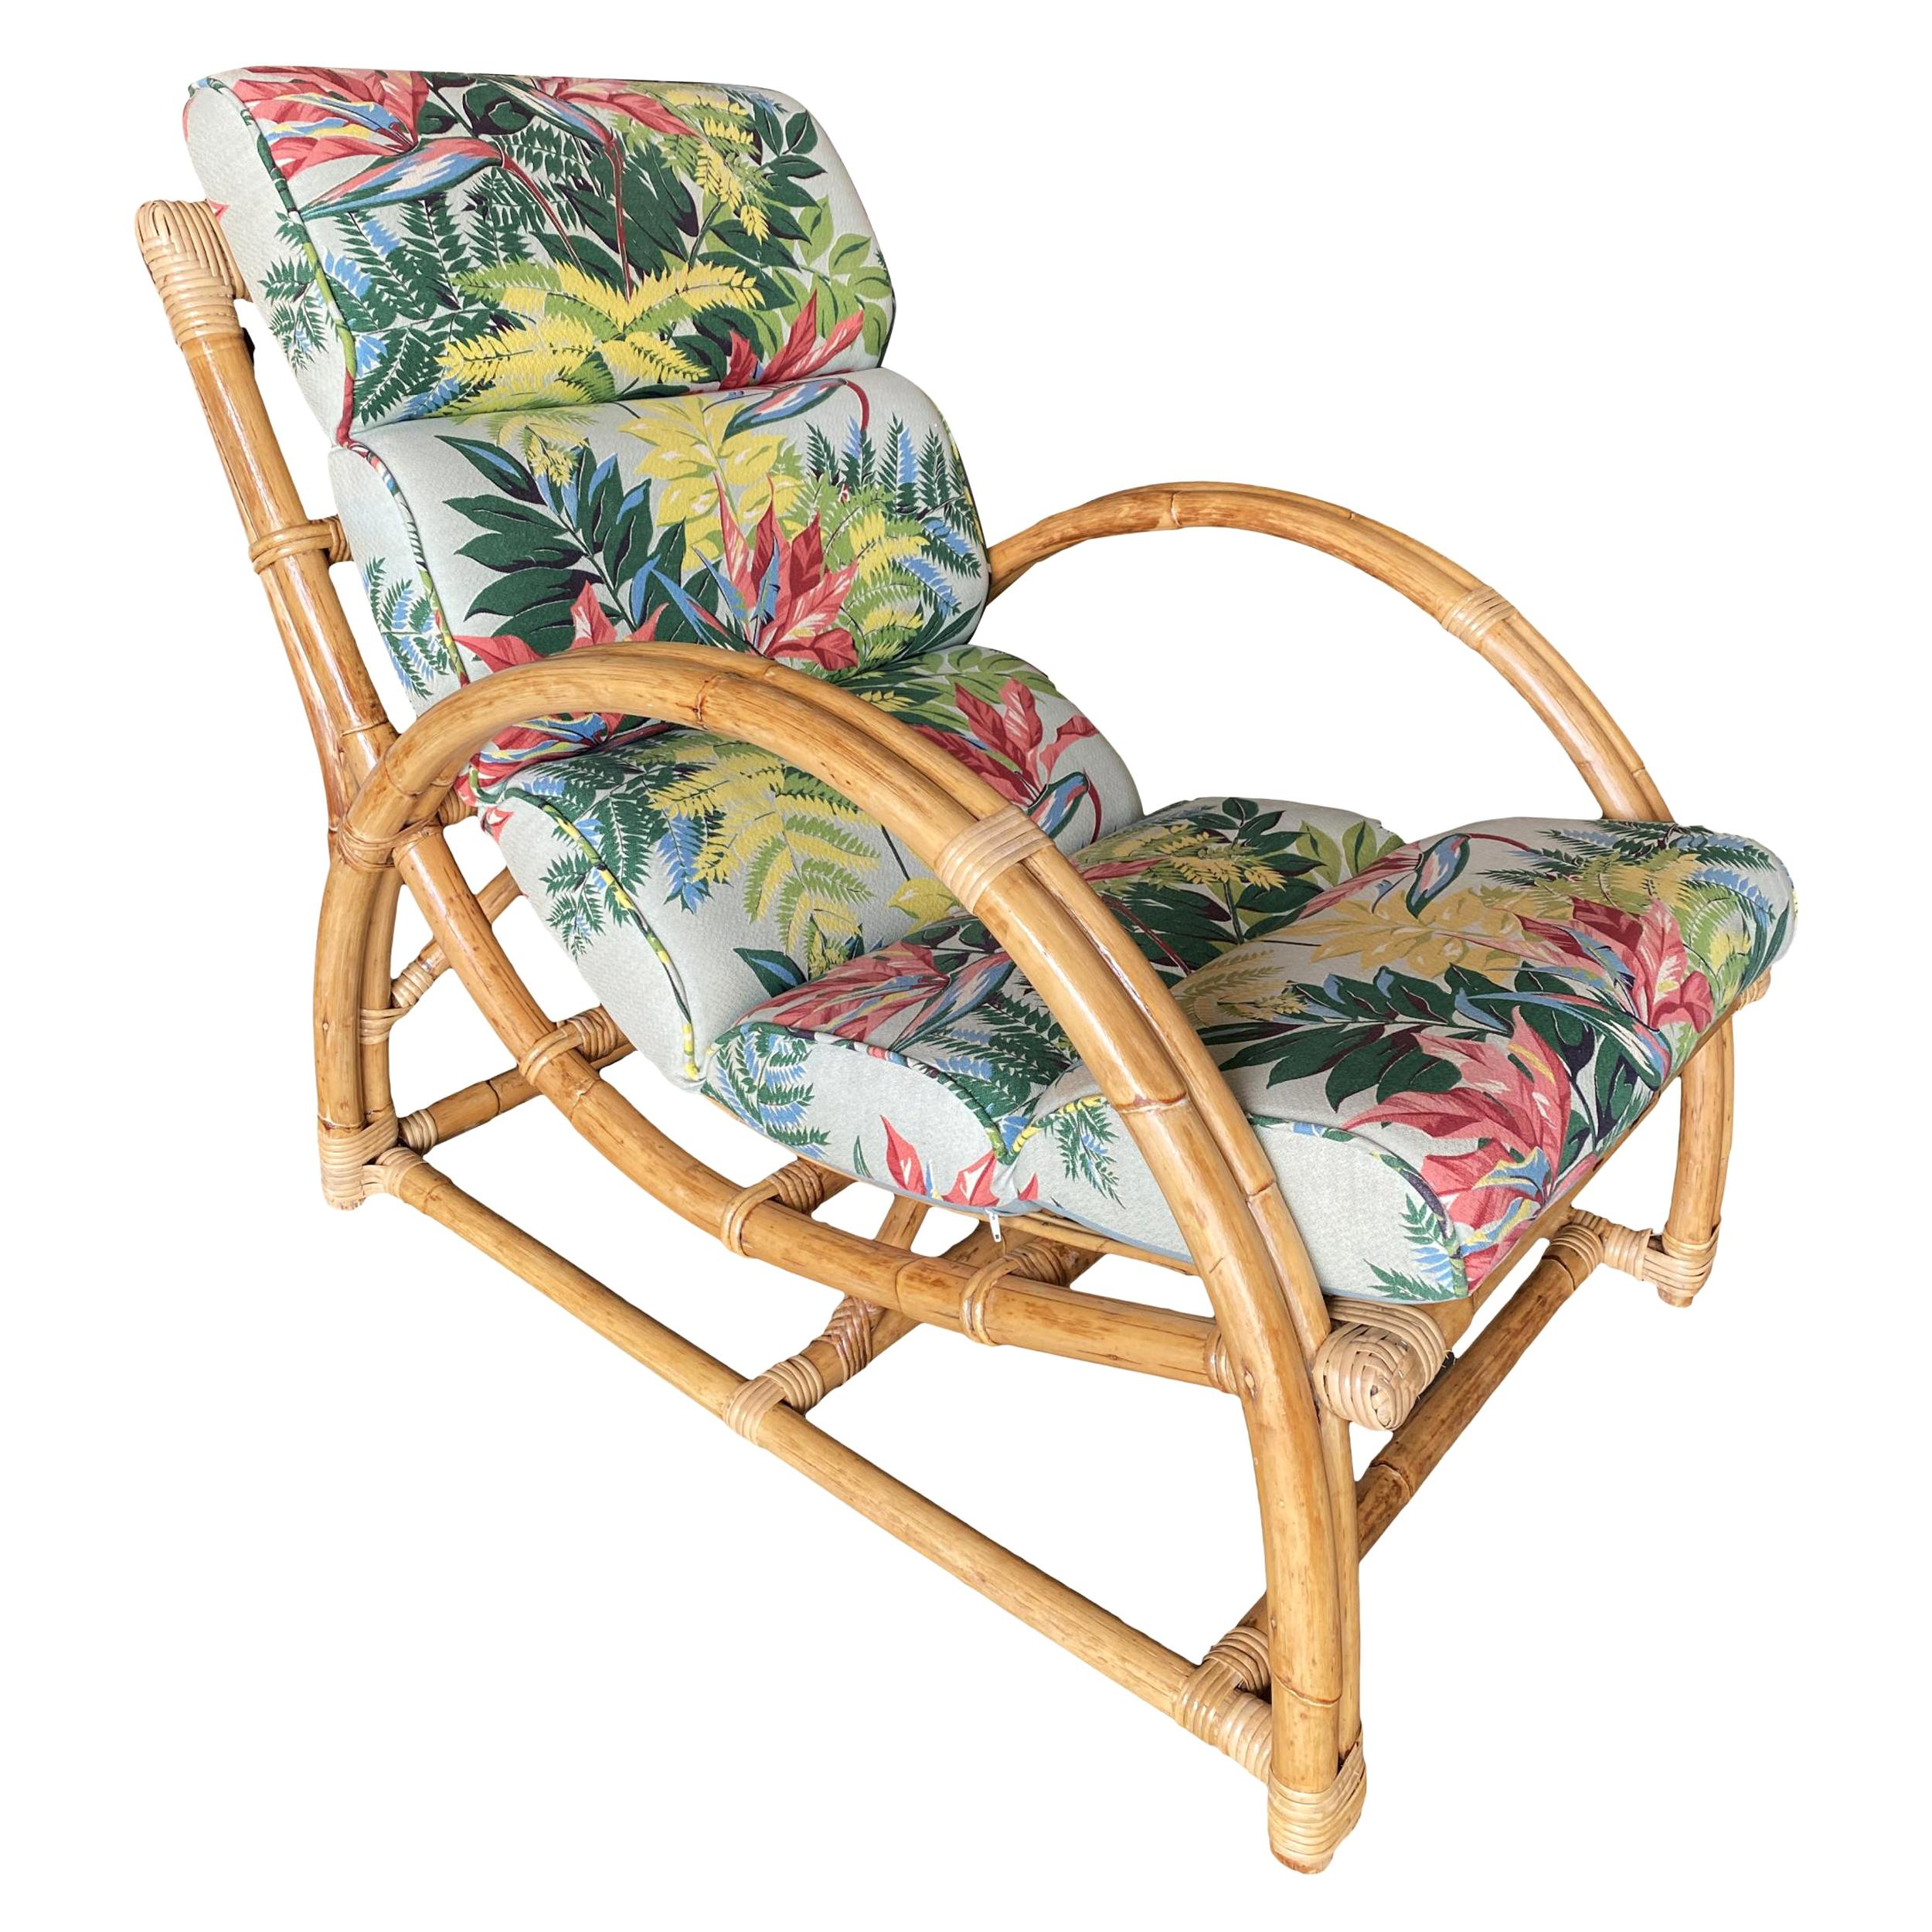 Restored Two-Strand "Half Moon" Rattan Cup Seat Lounge Chair